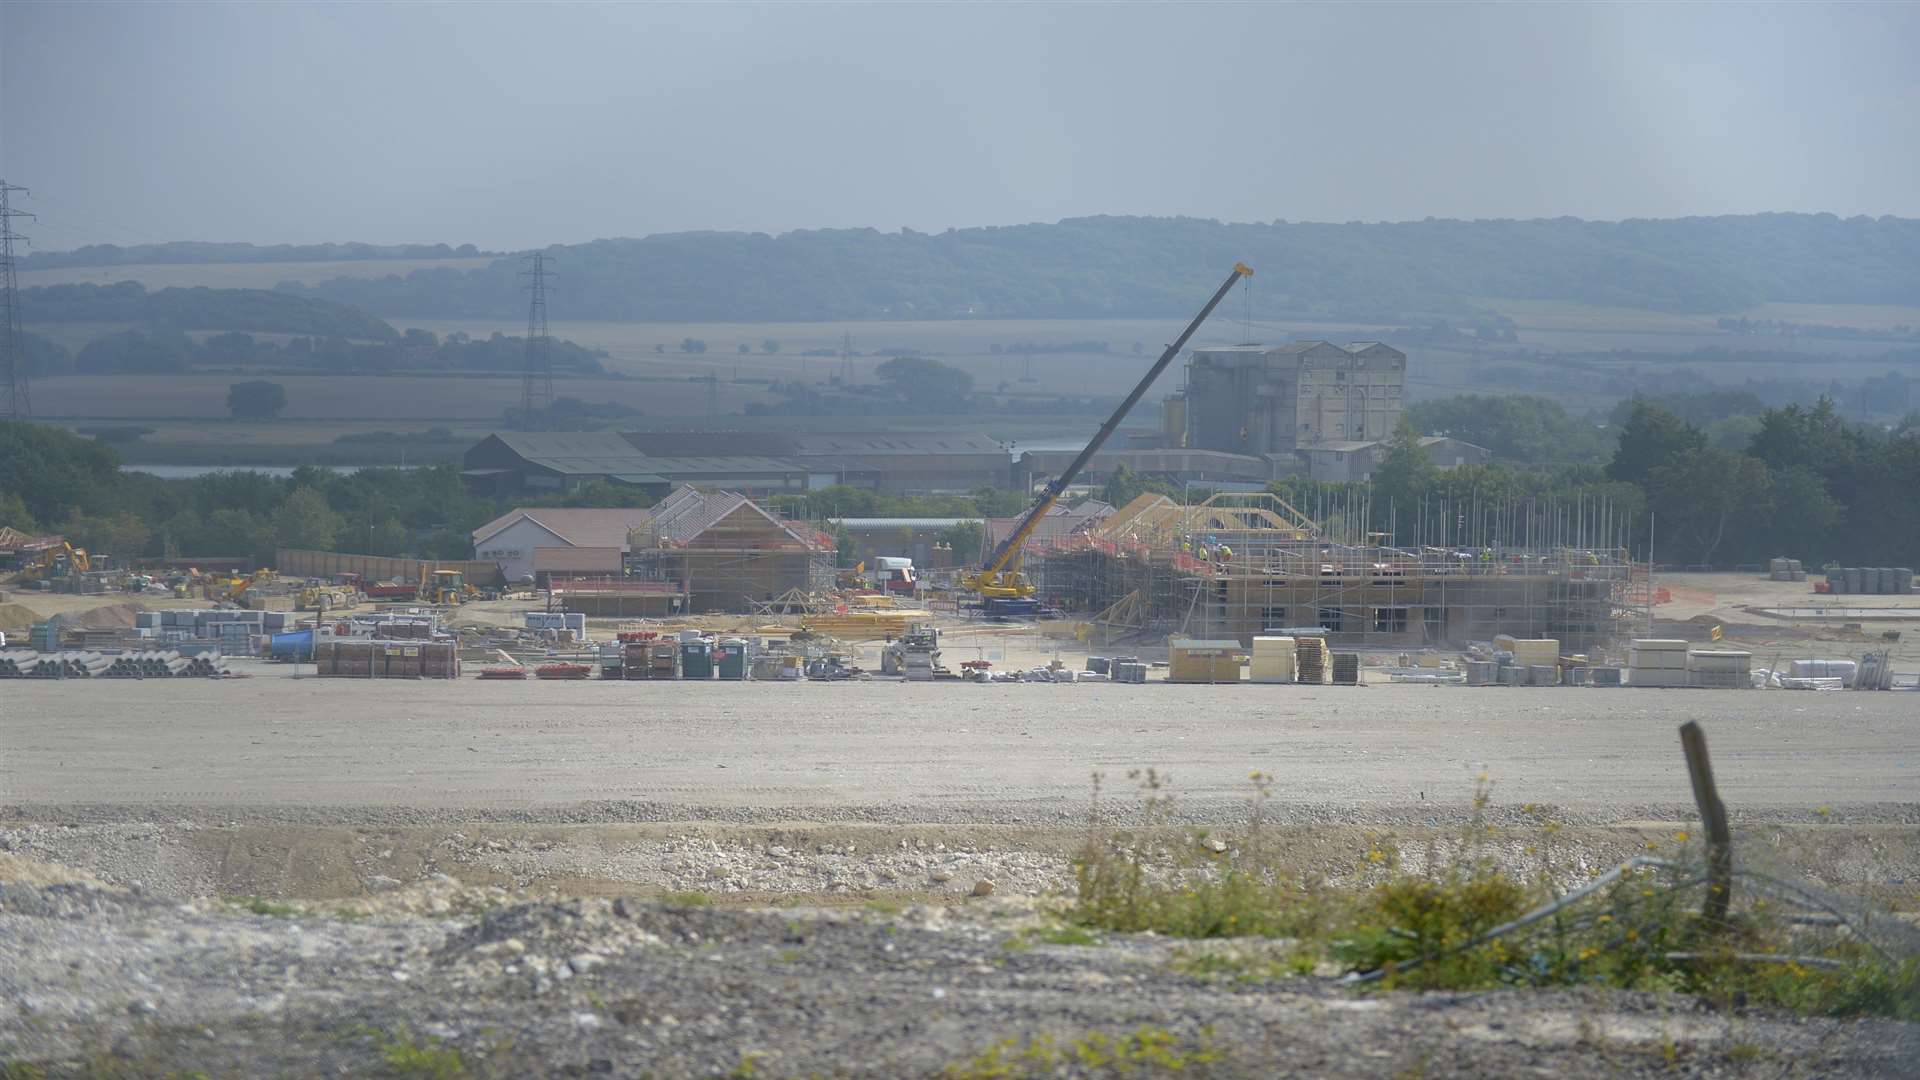 Views of the Redrow housing development taking shape on the site of the former cement works